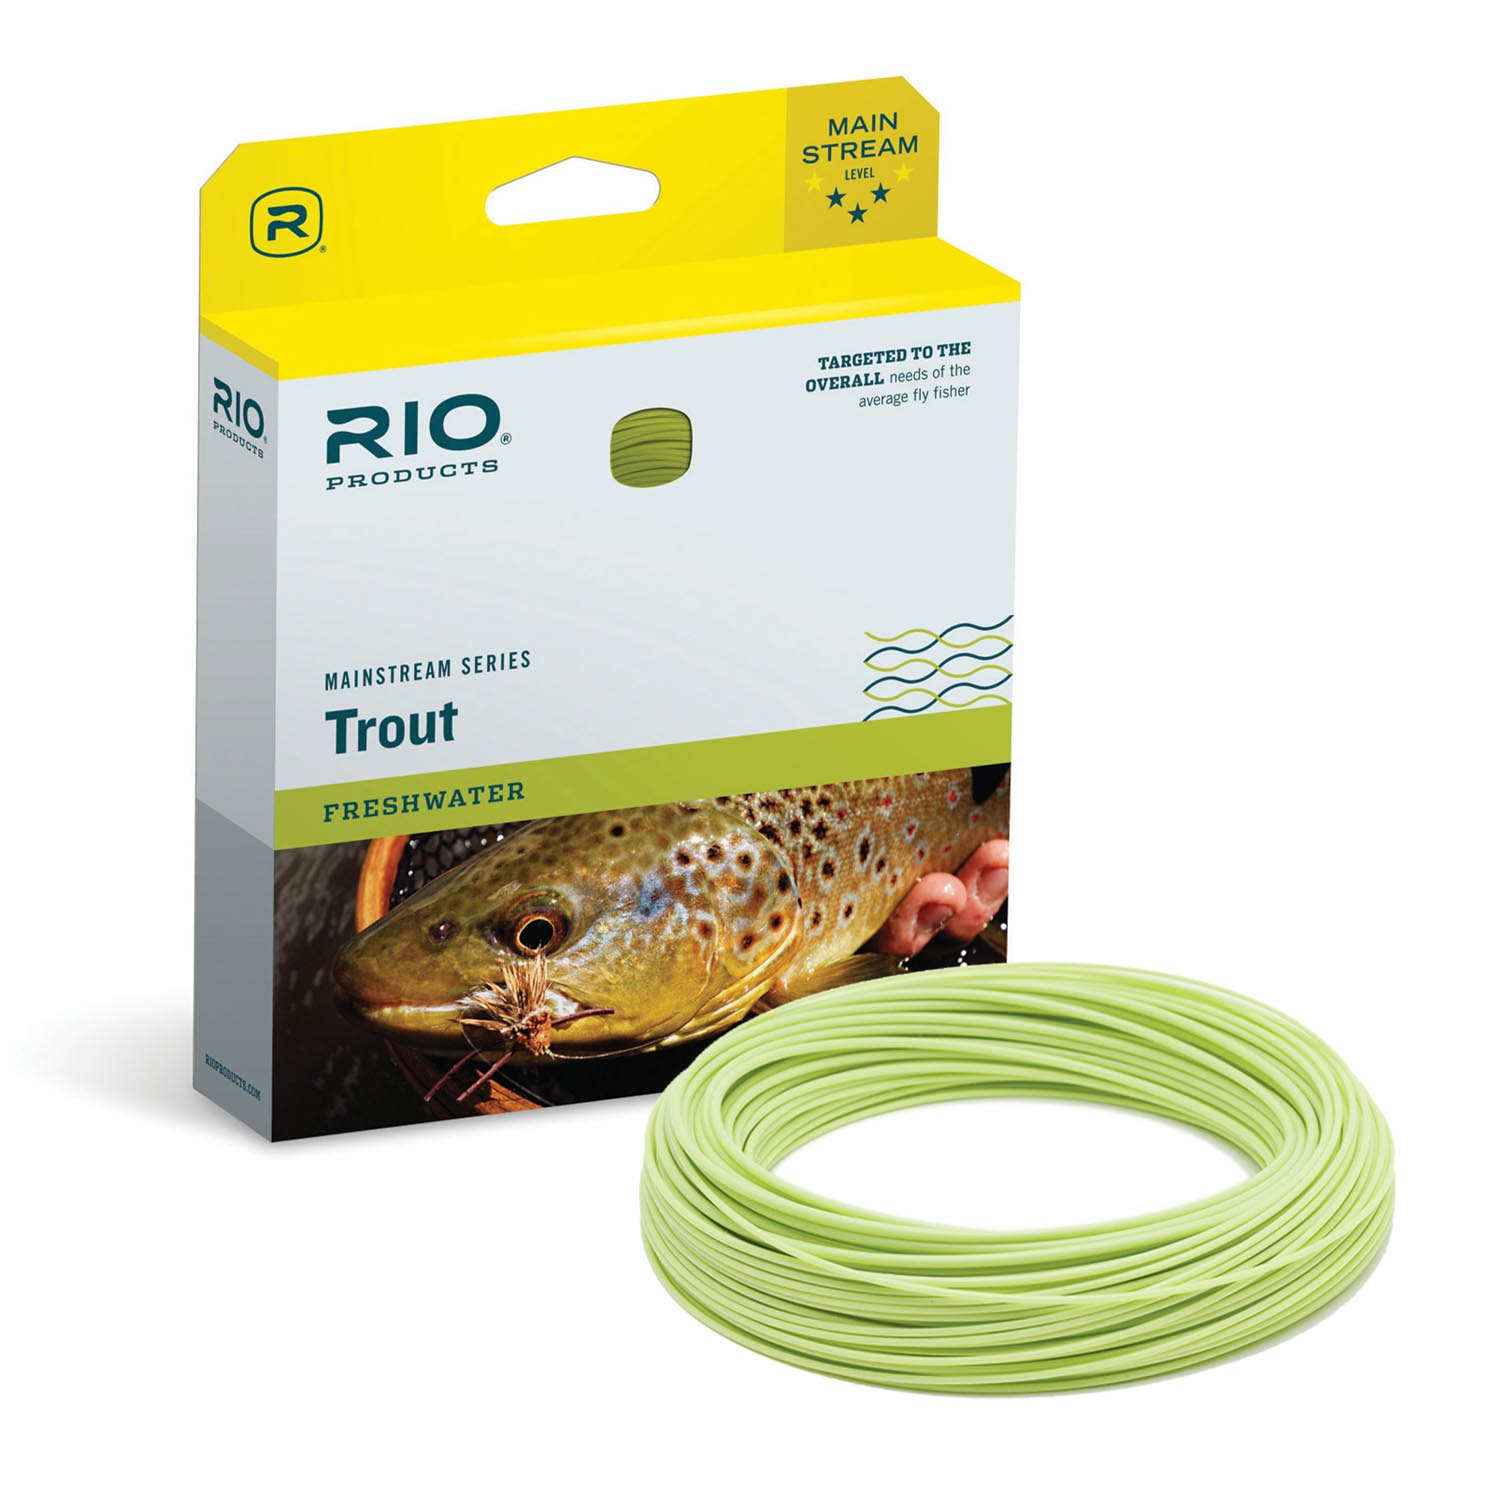 RIO Mainstream Trout Fly Line – Guide Flyfishing, Fly Fishing Rods, Reels, Sage, Redington, RIO